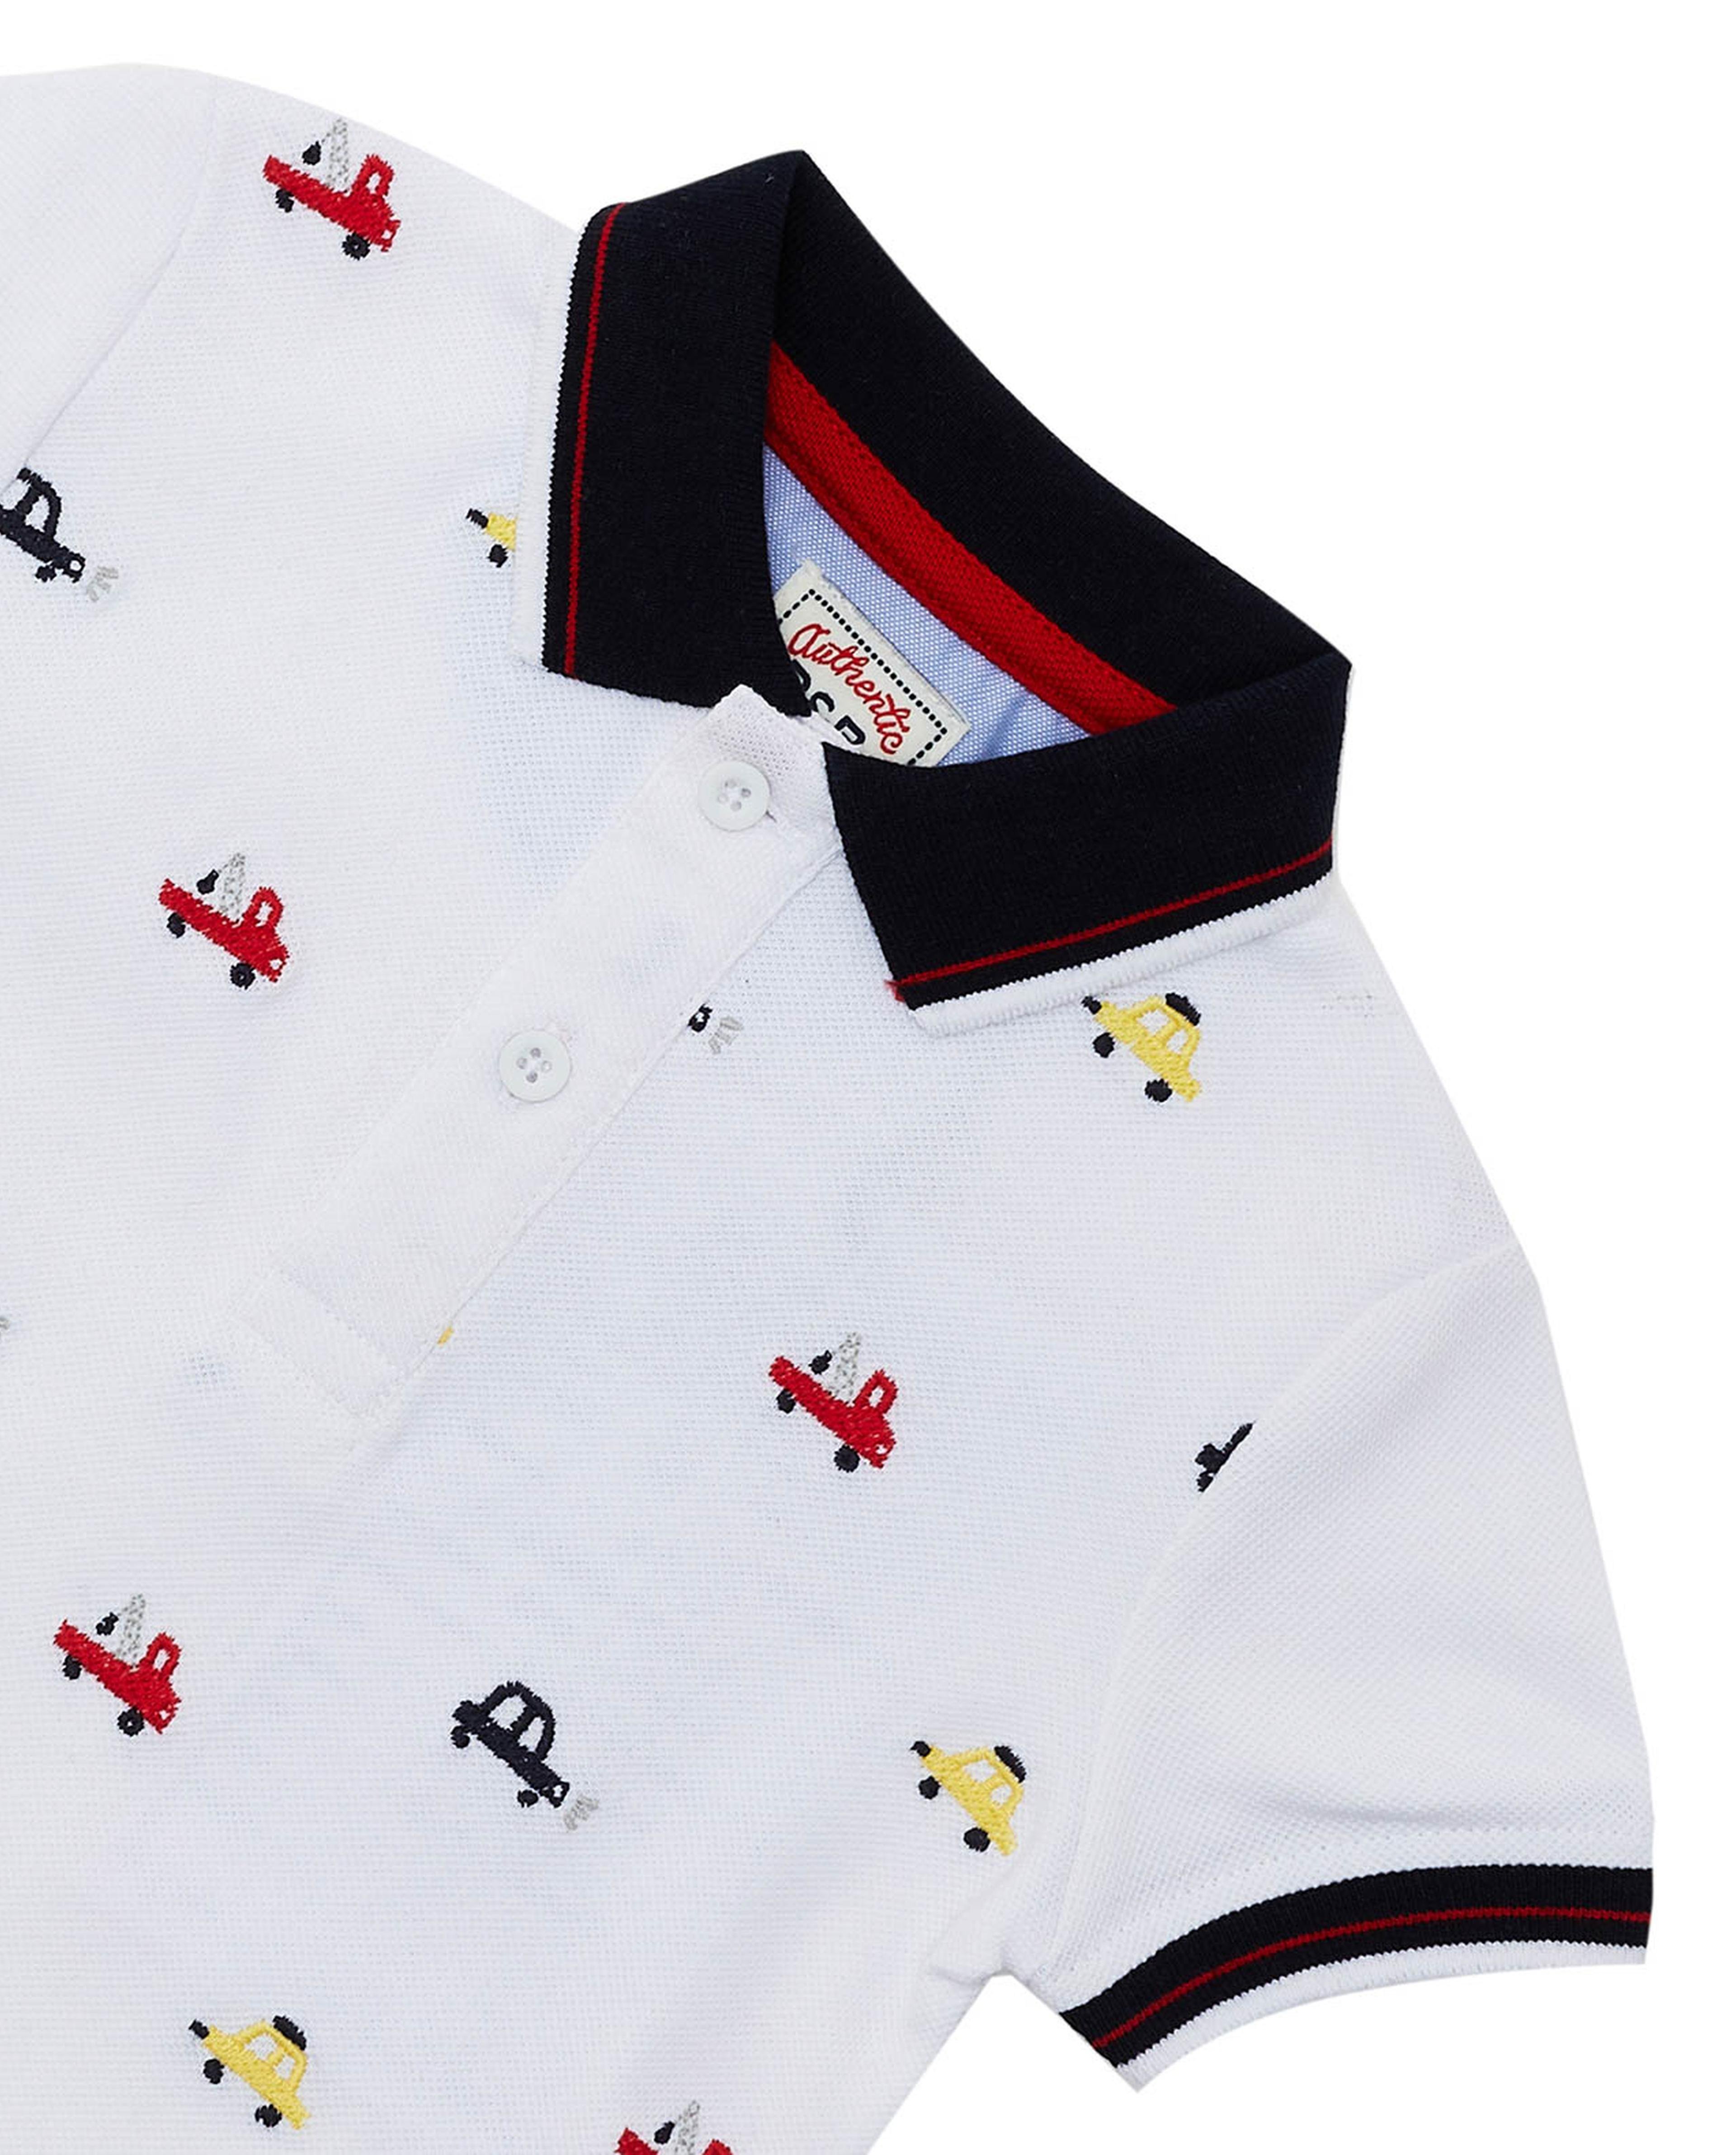 Printed T-Shirt with Polo Collar and Short Sleeves